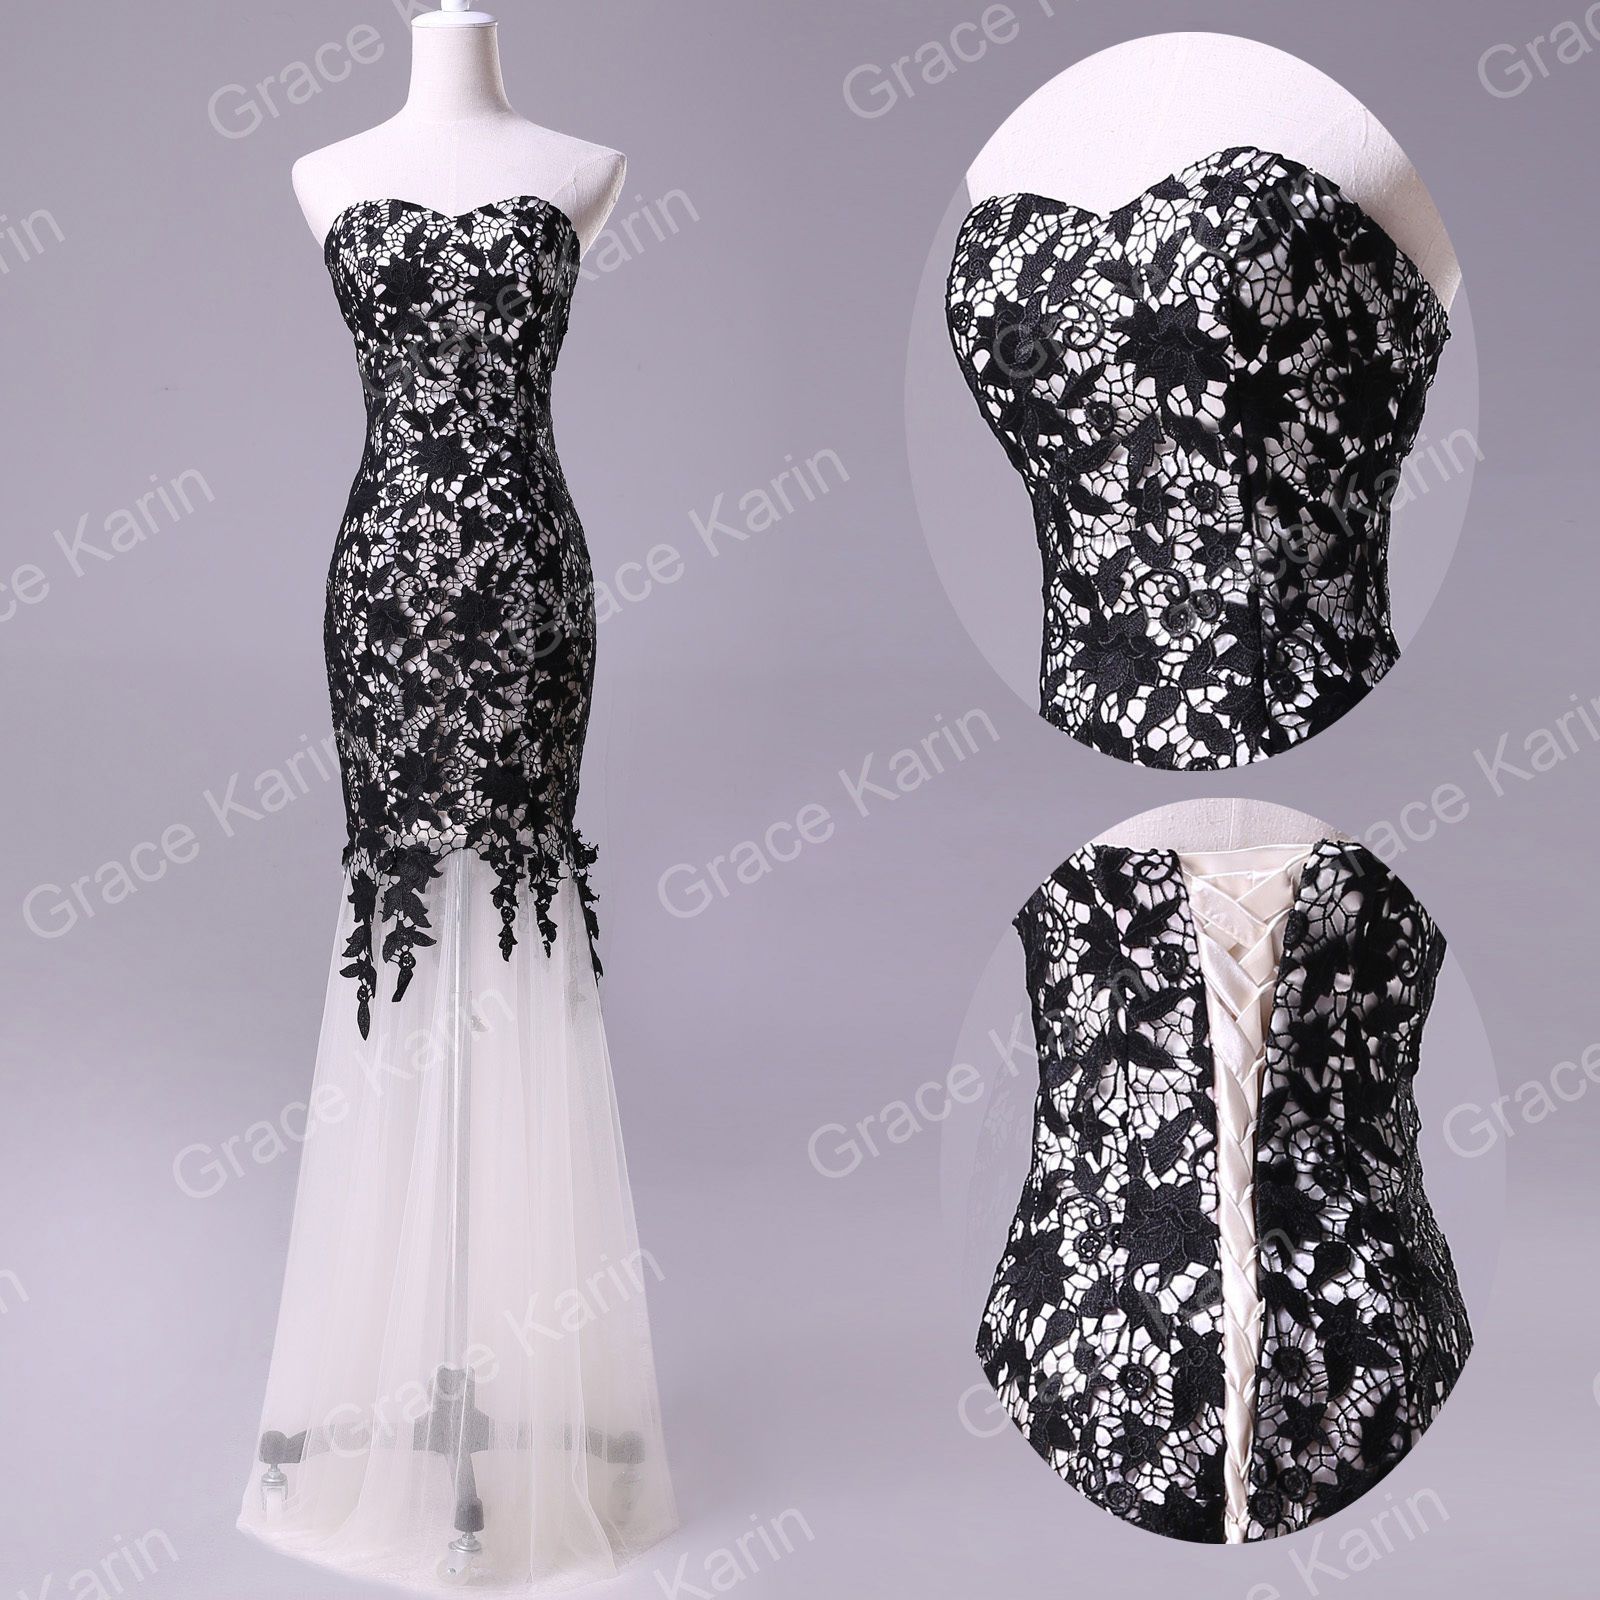 New Black Lace Prom Ball Cocktail Party Wedding Dress Bridal Formal Evening Gown | eBay